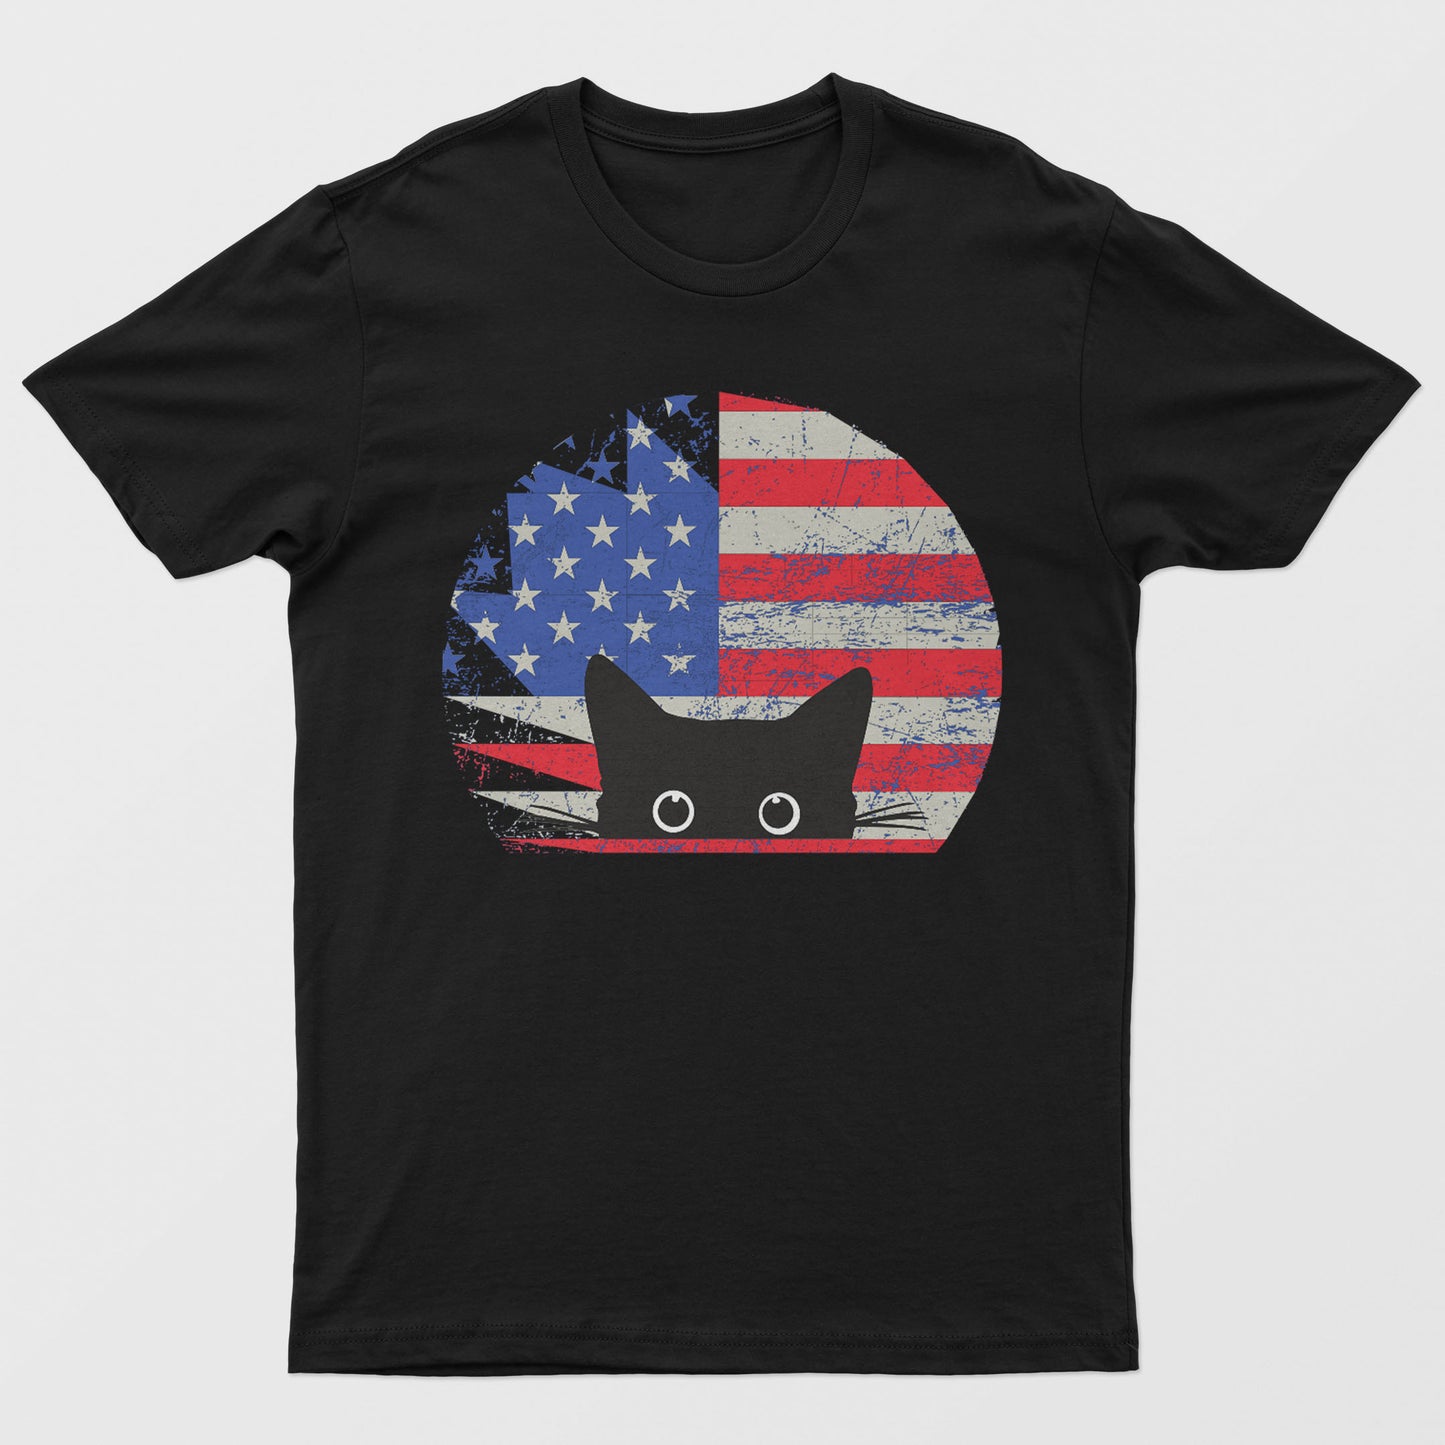 Unisex Cat in US Flag Graphic Print T-Shirt - S-XXXL, Various Colors, Free Ship